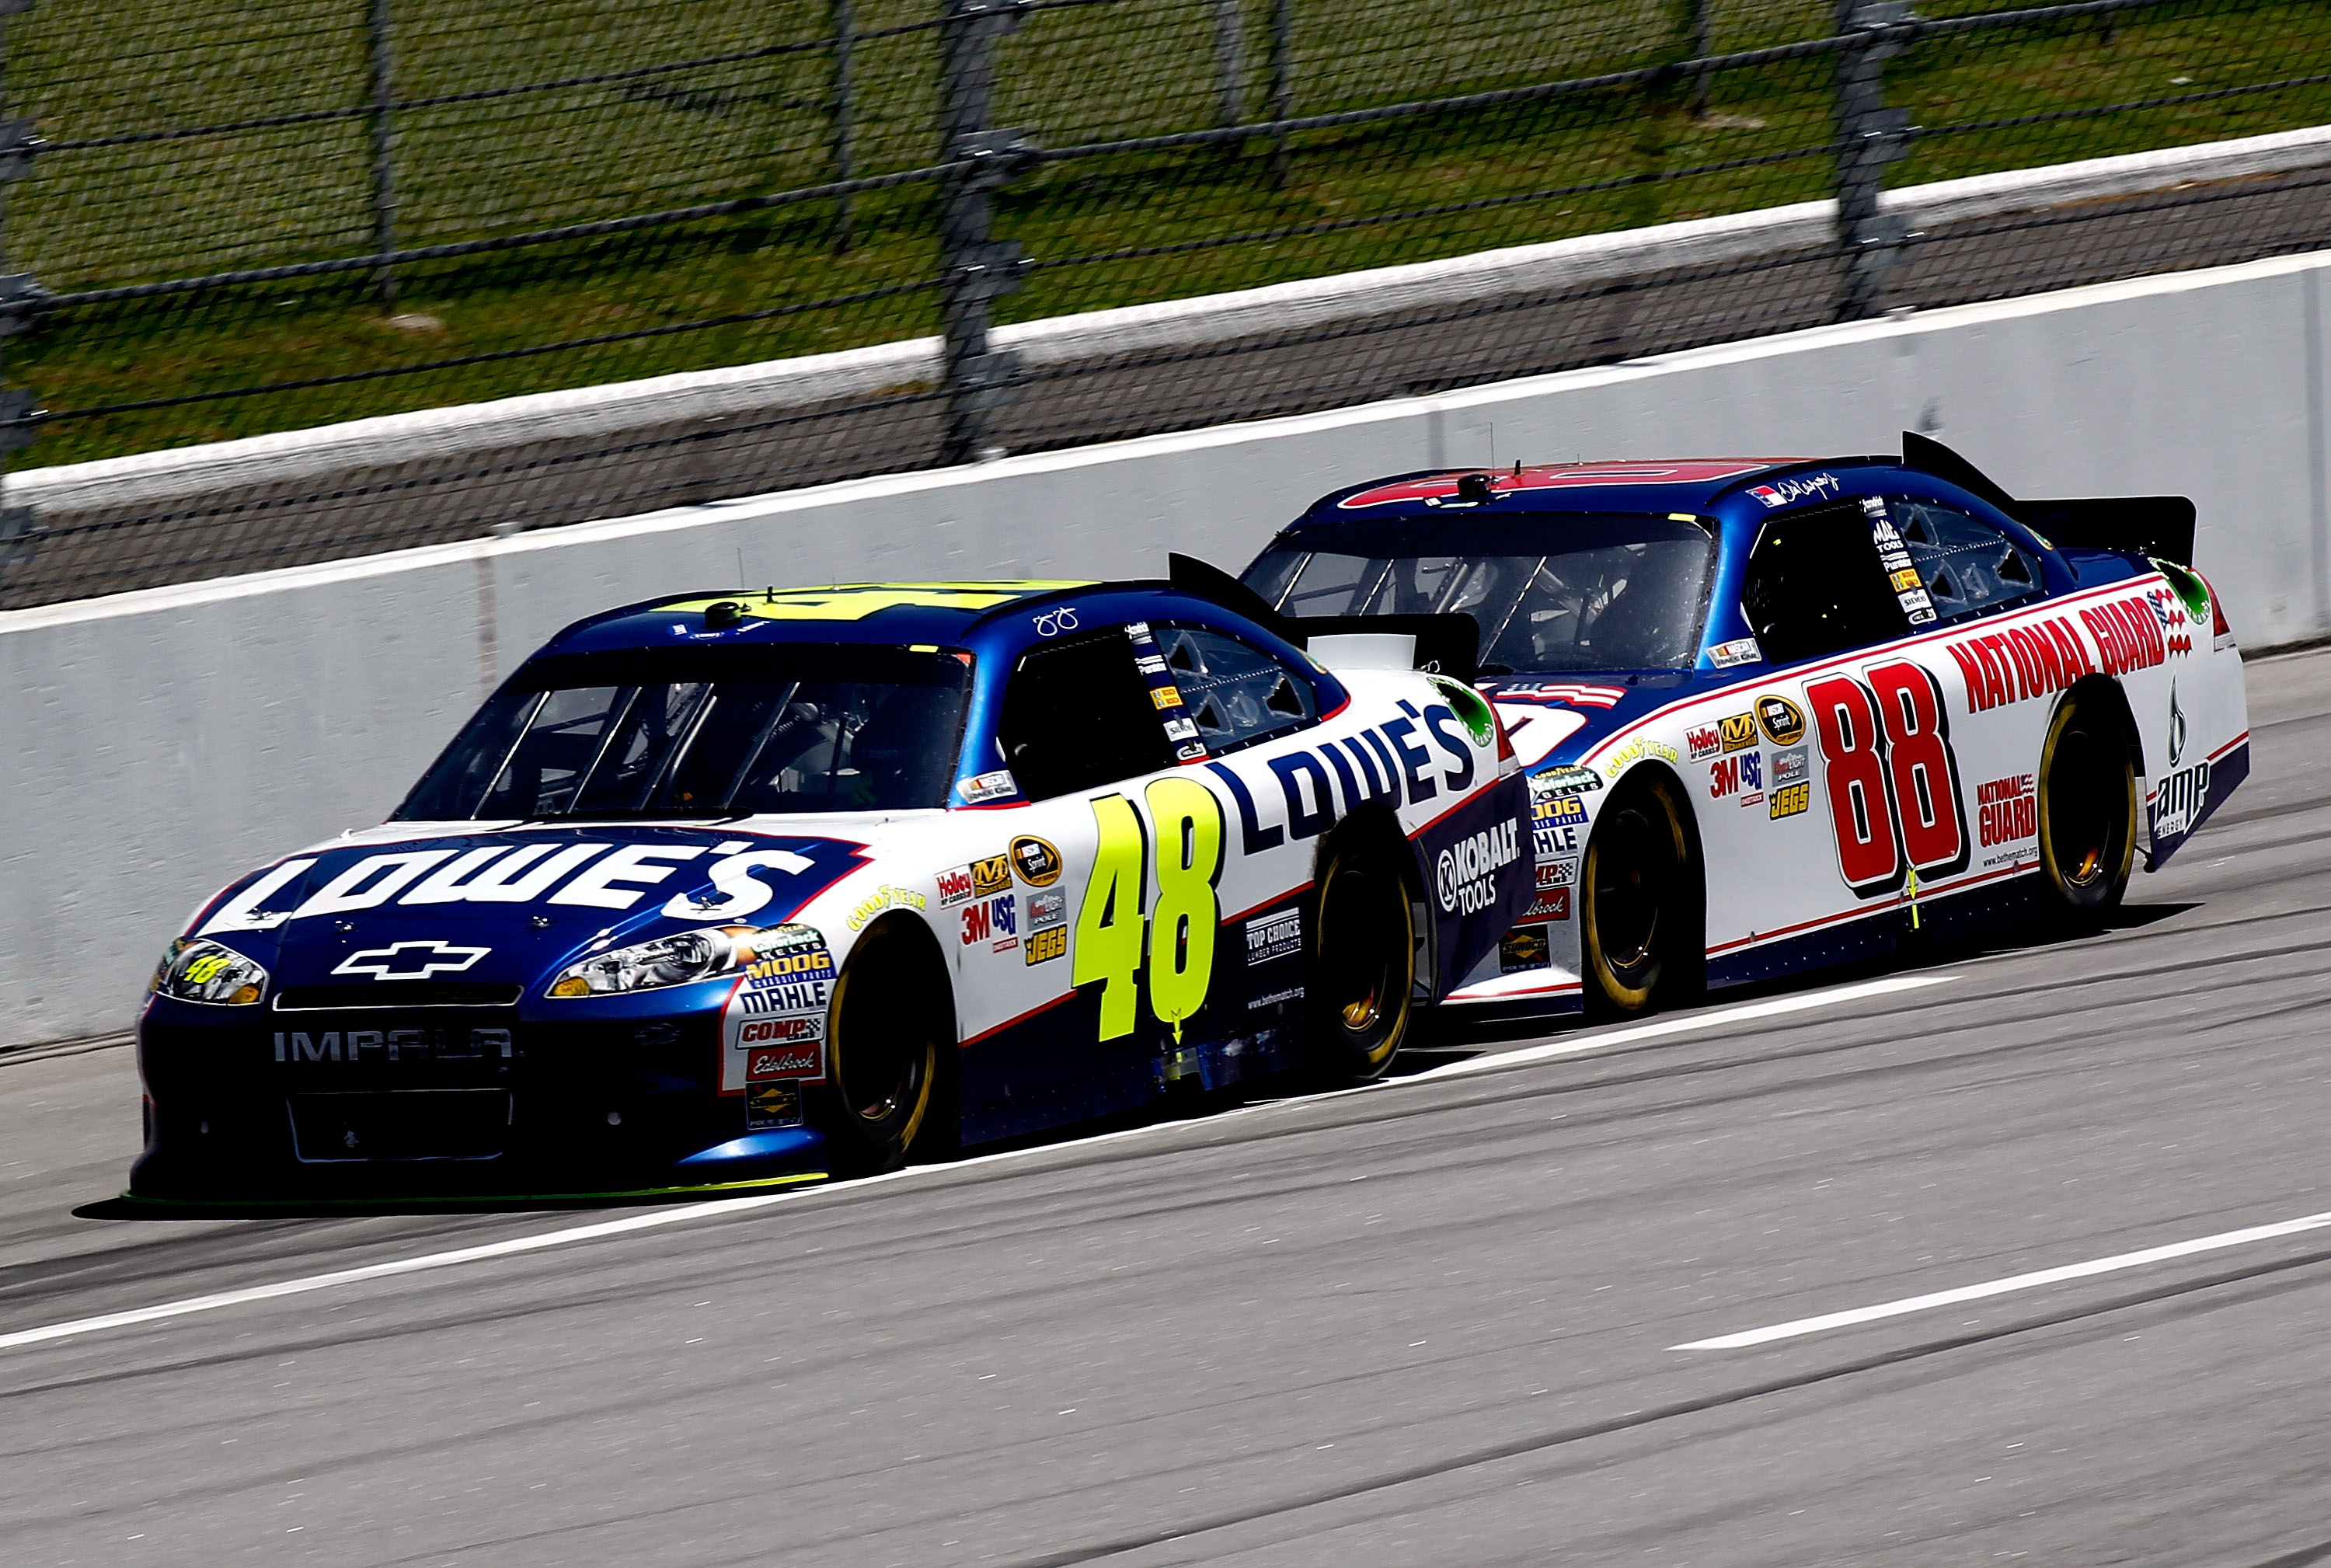 TALLADEGA, AL - APRIL 17: Jimmie Johnson, driver of the #48 Lowe's Chevrolet, leads Dale Earnhardt Jr., driver of the #88 National Guard/Amp Energy Chevrolet, during the NASCAR Sprint Cup Series Aaron's 499 at Talladega Superspeedway on April 17, 2011 in